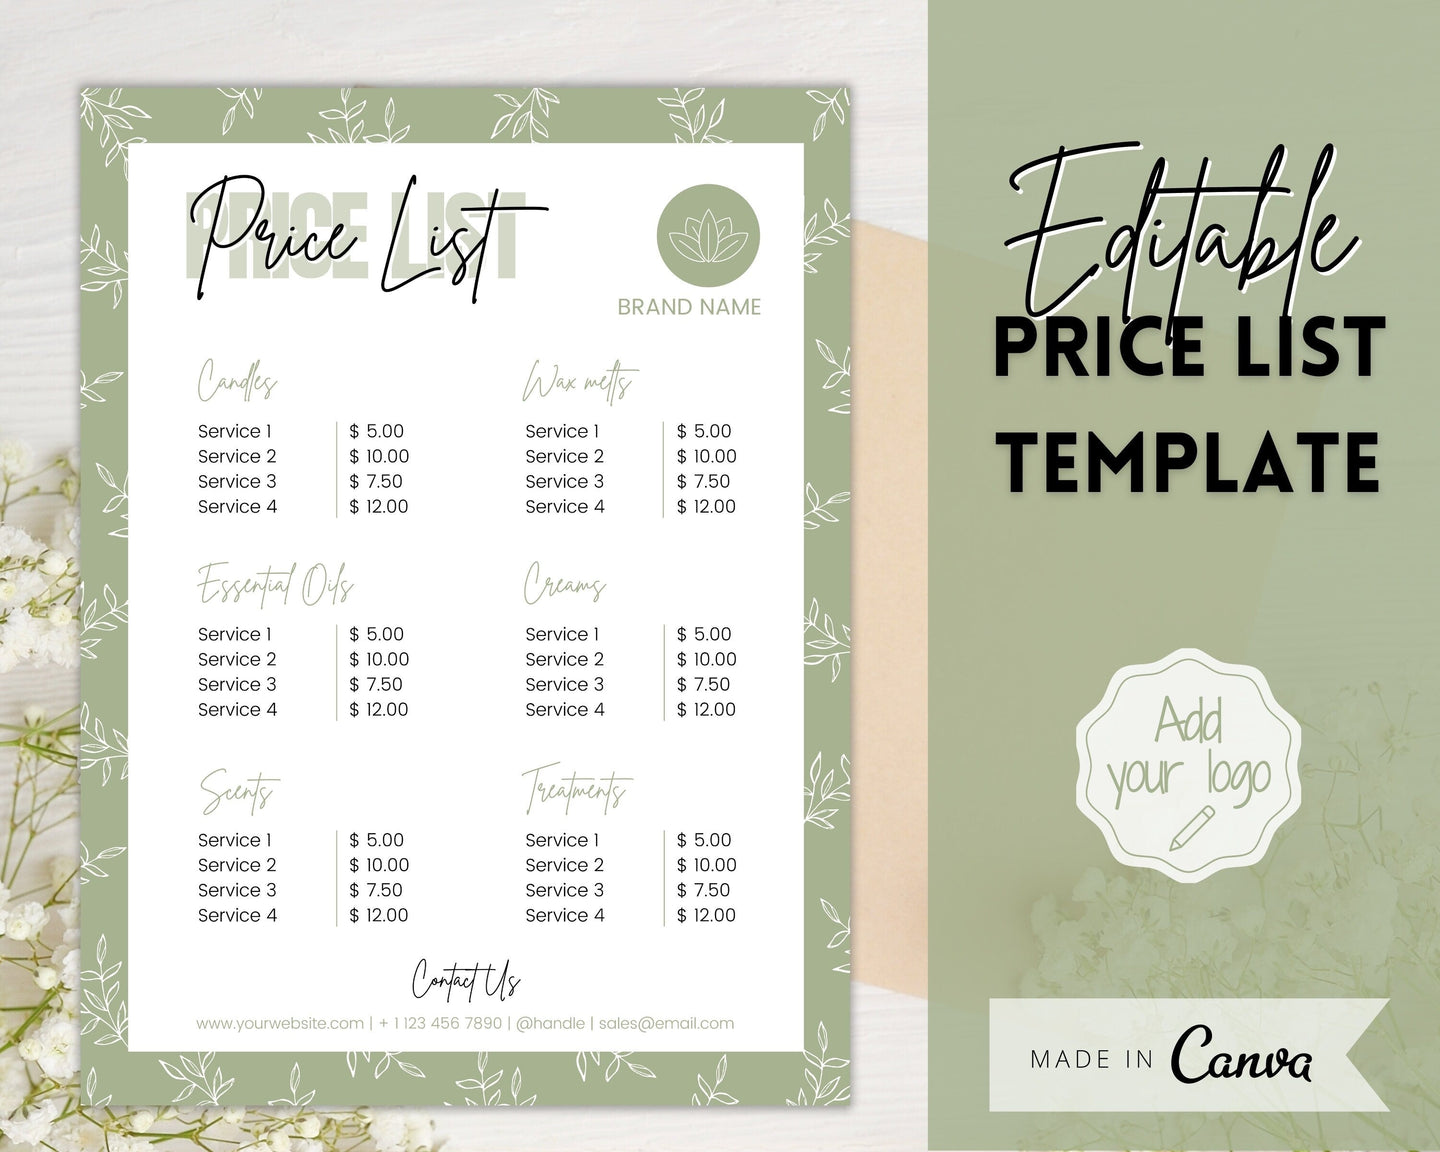 PRICE LIST Template Editable! Price Sheet, Pricing Guide, Hair Salon, Hairdresser, Photography, Beauty, Menu, Make up, Tags, Tumbler, Canva | Style 10